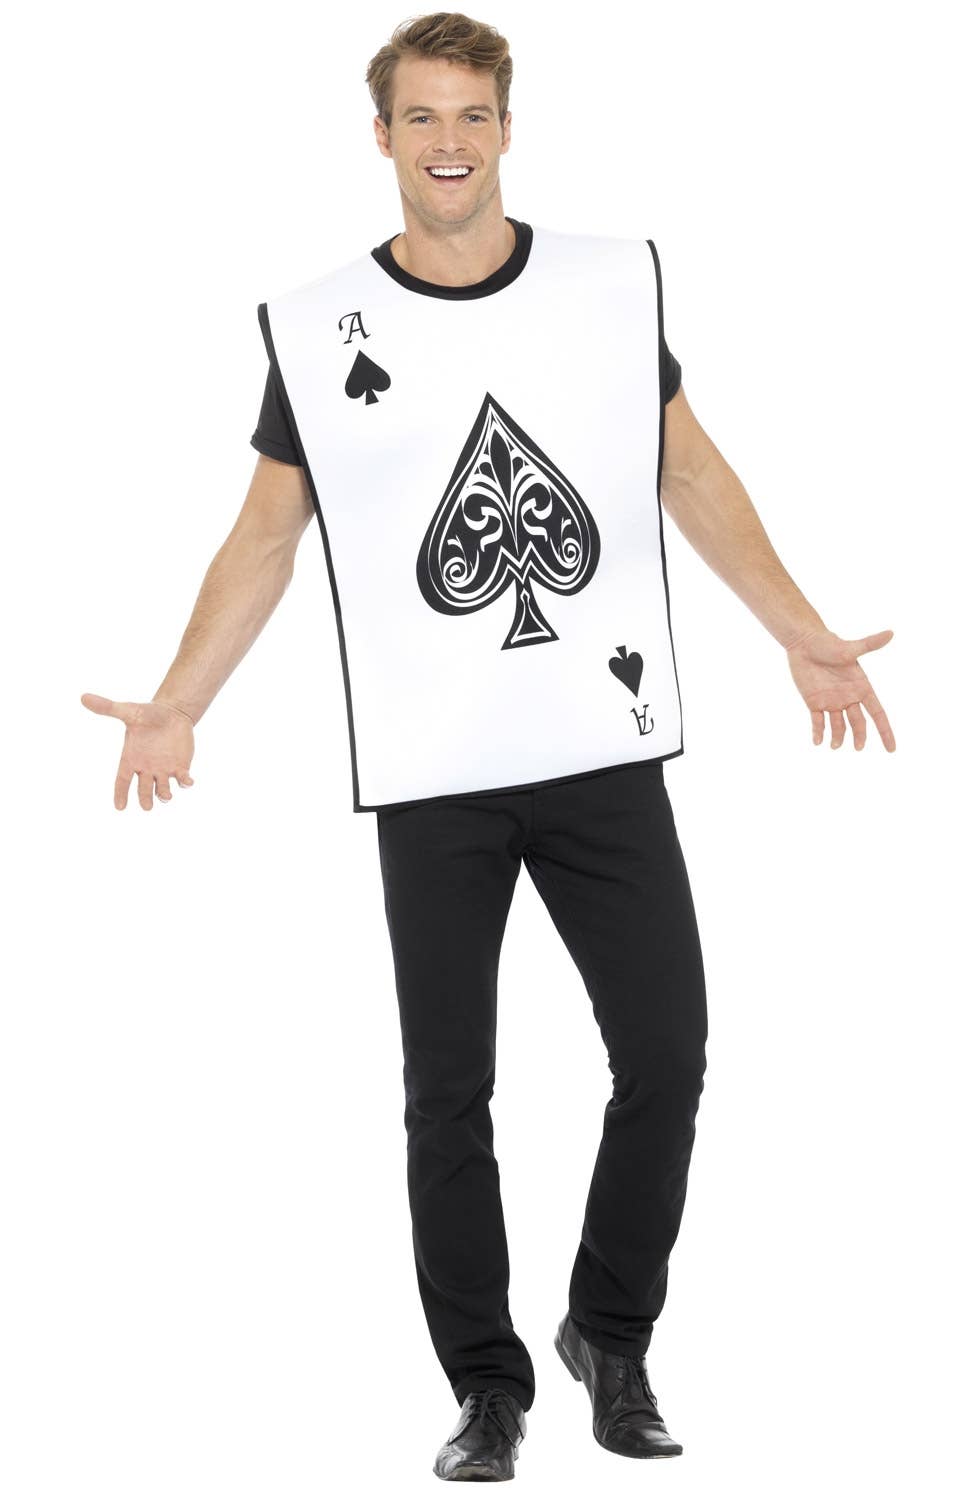 Alice in Wonderland Playing Card Guard Costume Image 1